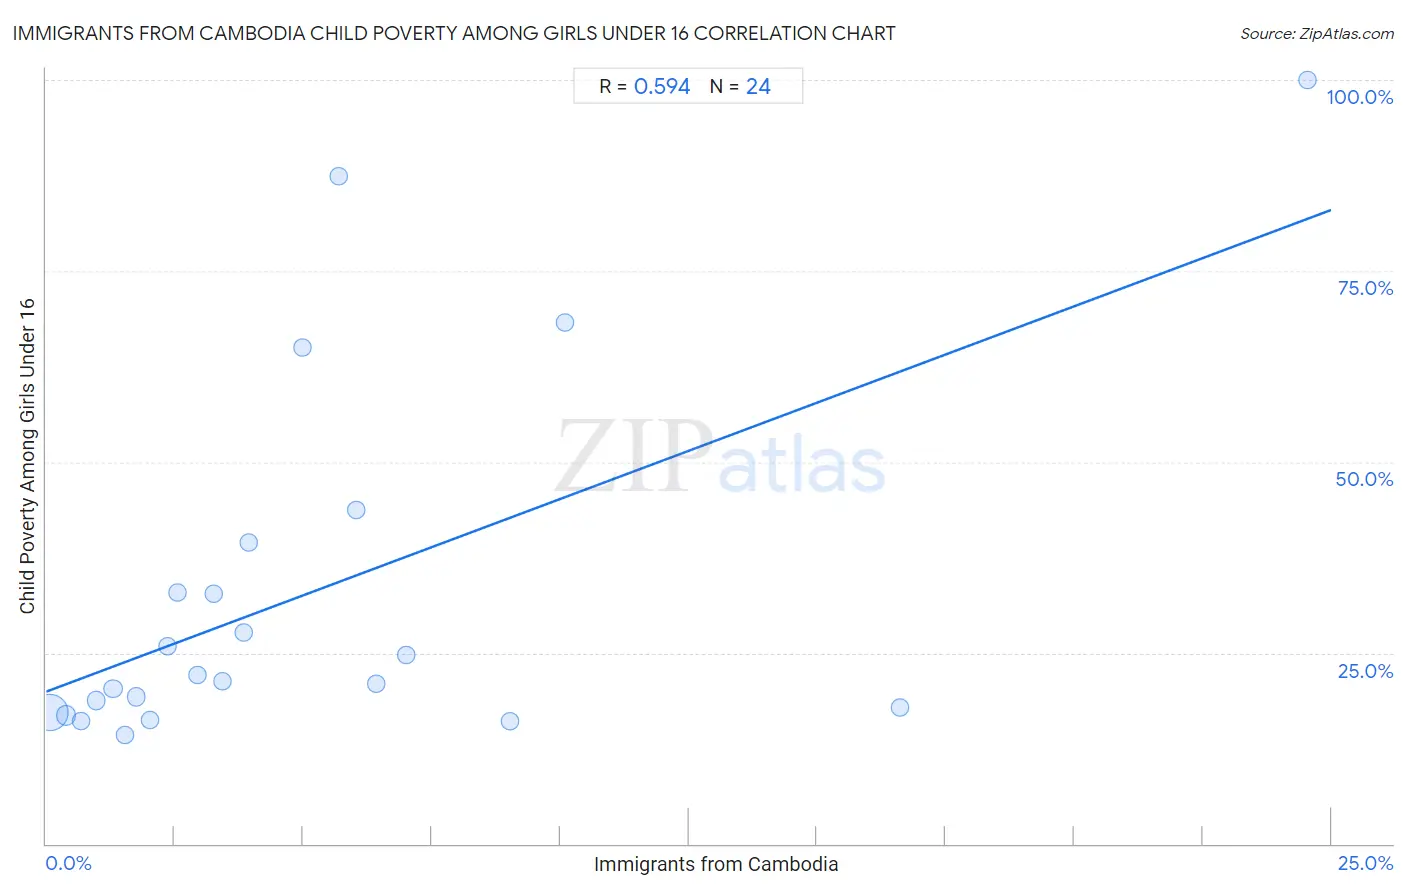 Immigrants from Cambodia Child Poverty Among Girls Under 16